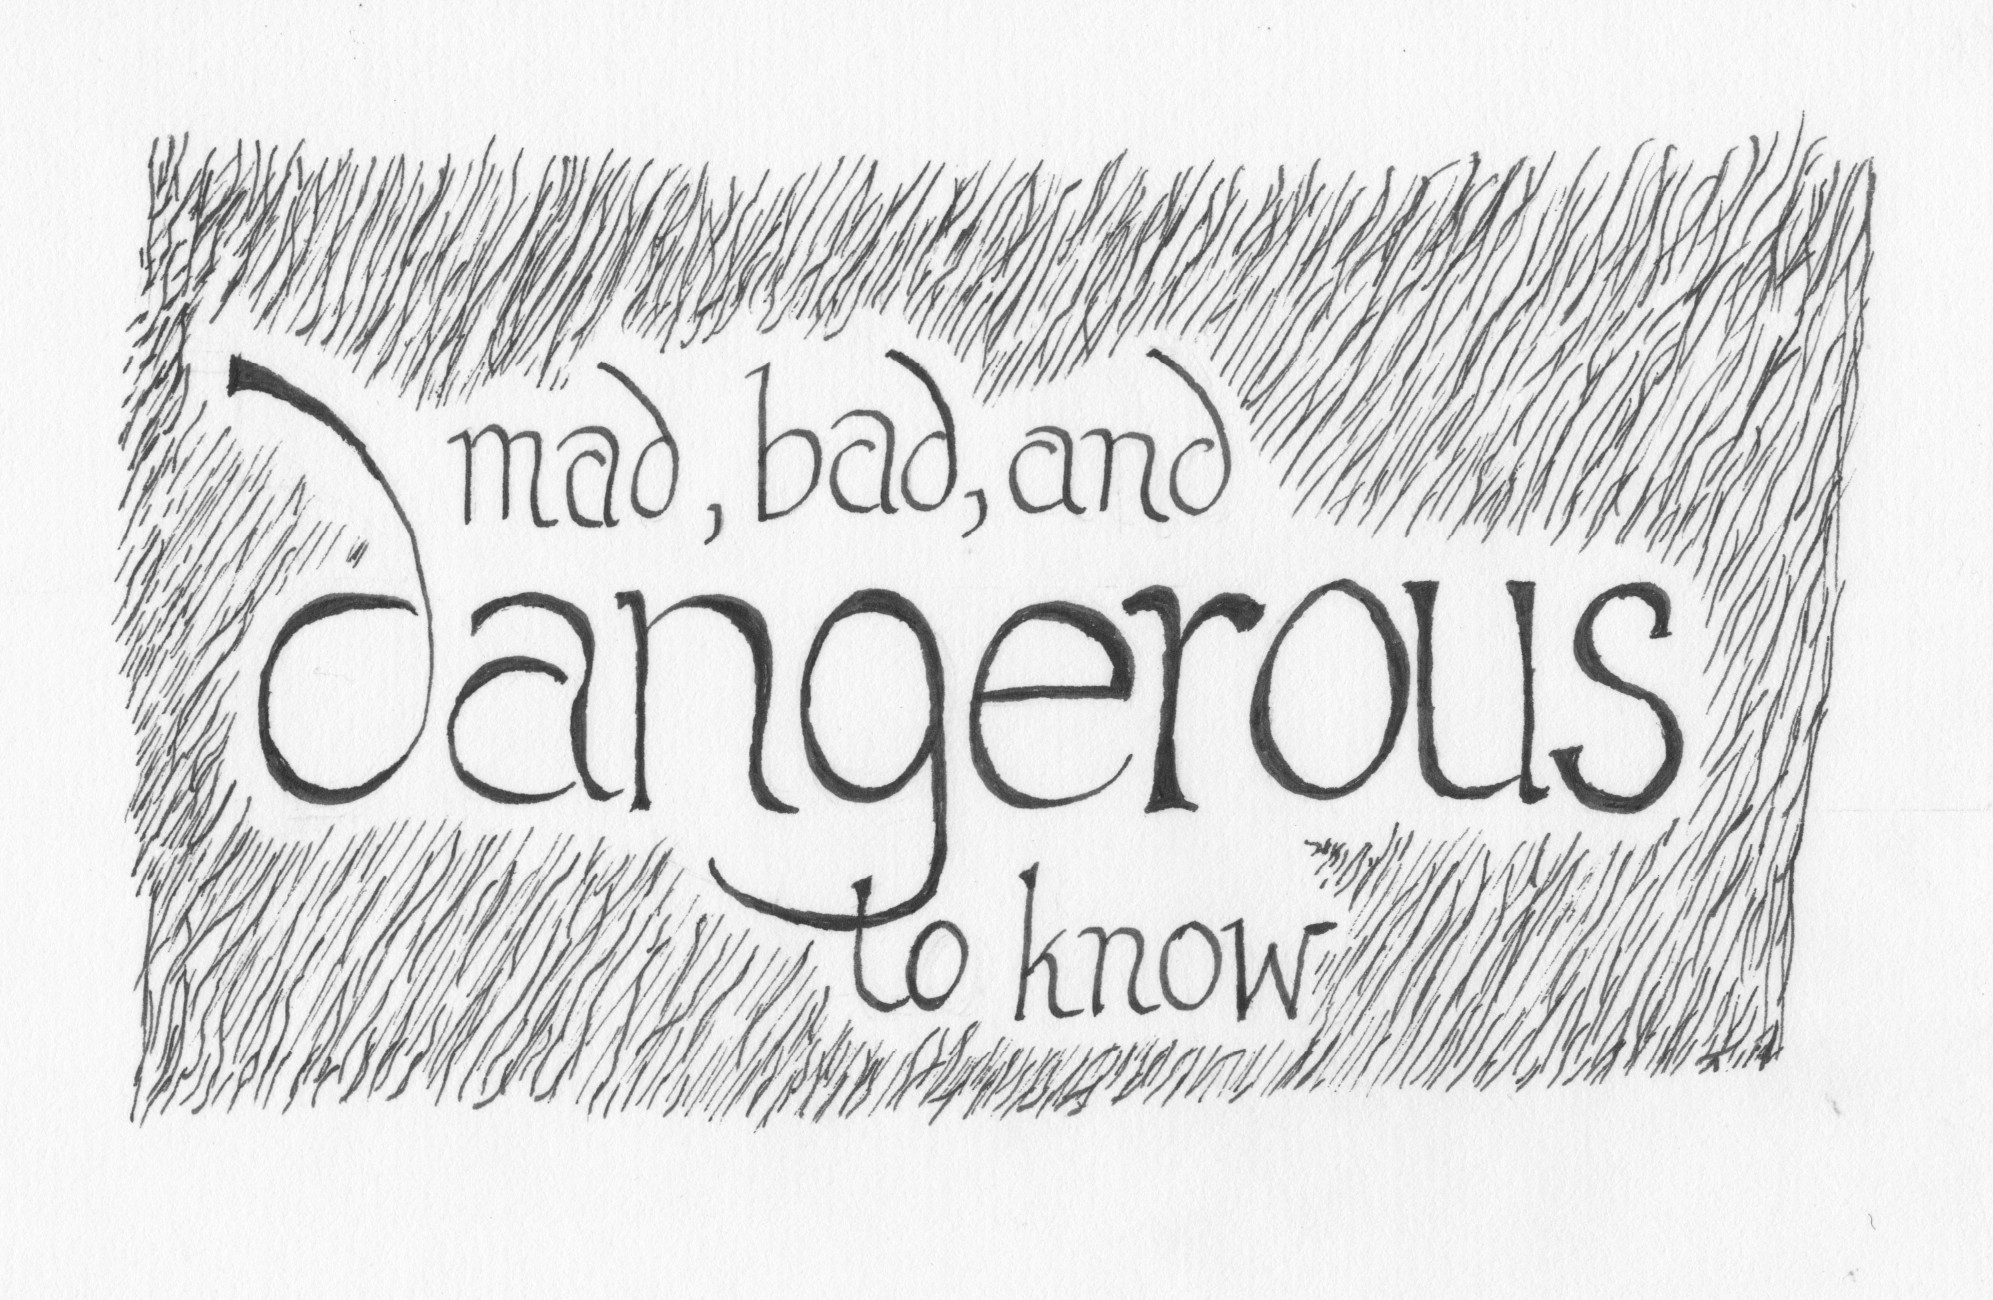 "Mad bad and dangerous to know" Ink on paper, by AK Krajewska. Image description: Calligraphied words "Mad, bad,and dangerous to know" framed in a field of wavy lines like long grass or hair. Drawing